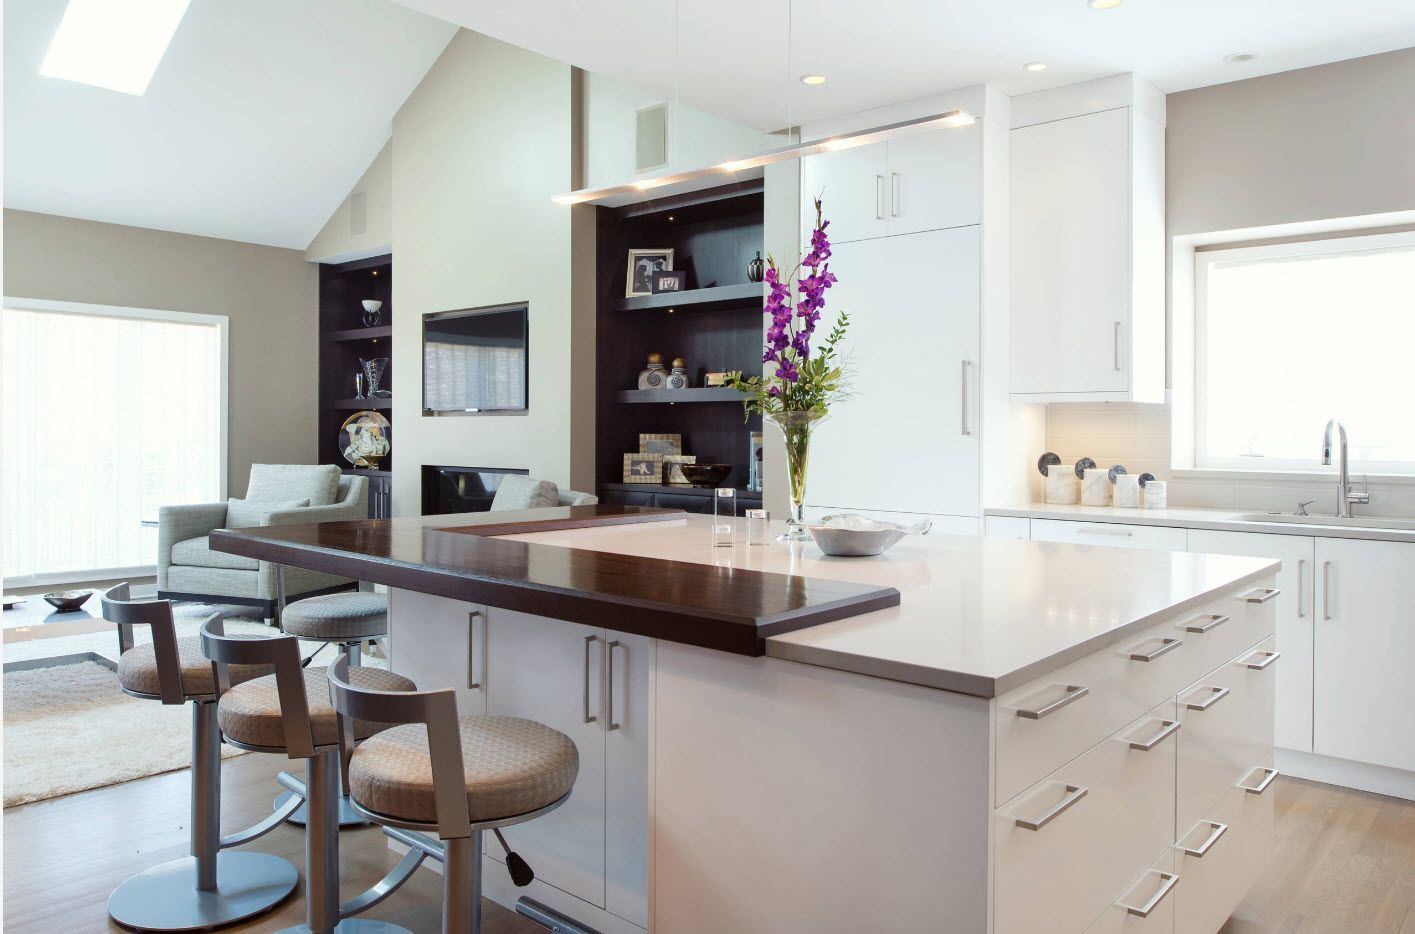 Loft and hi-tech combination of styles for the open layout kitchen with large island